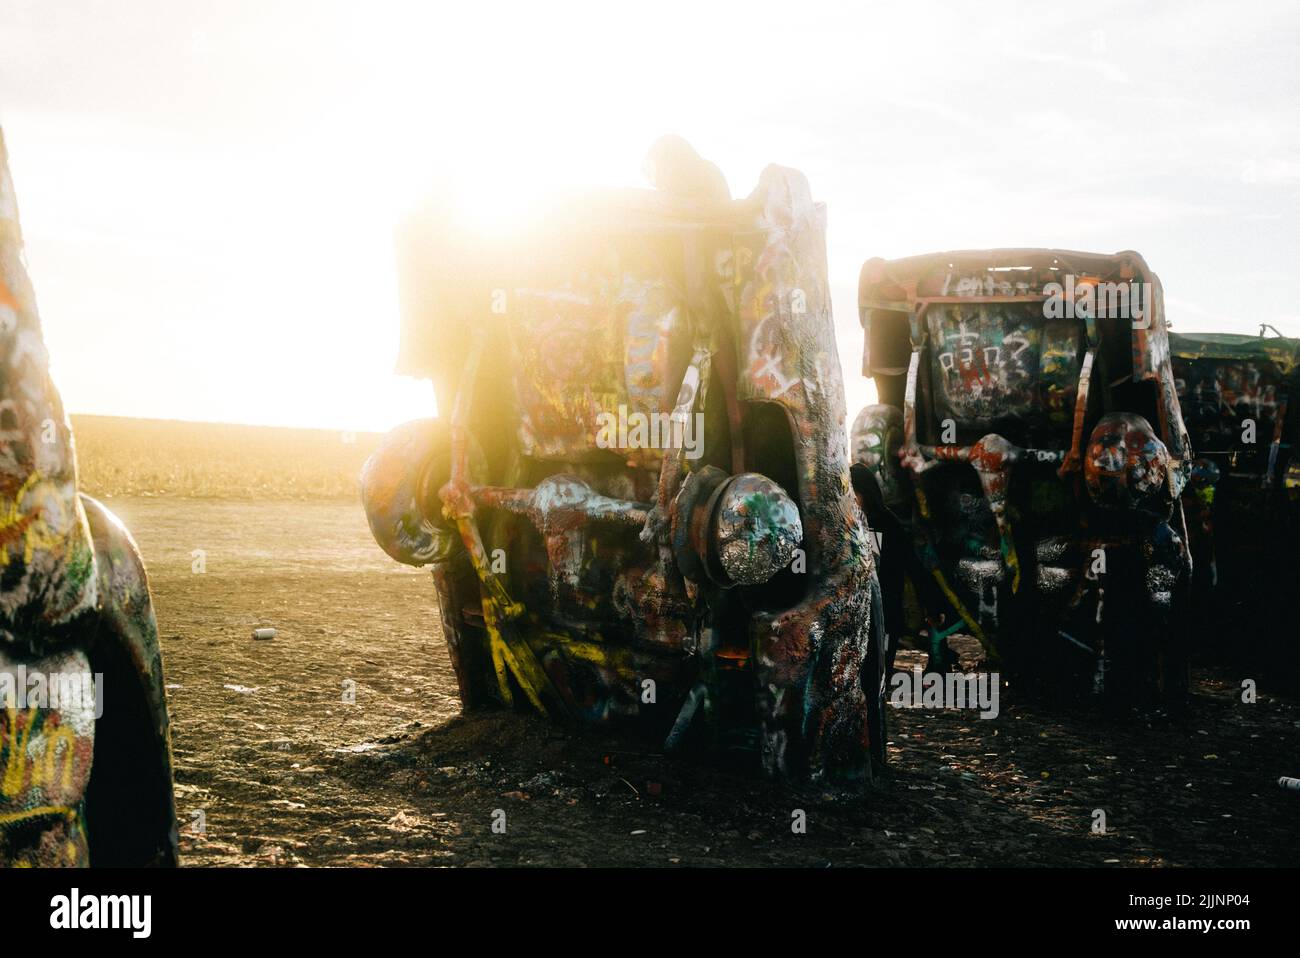 A row of colorful cars at Cadillac Ranch in Amarillo, Texas against a bright sky Stock Photo